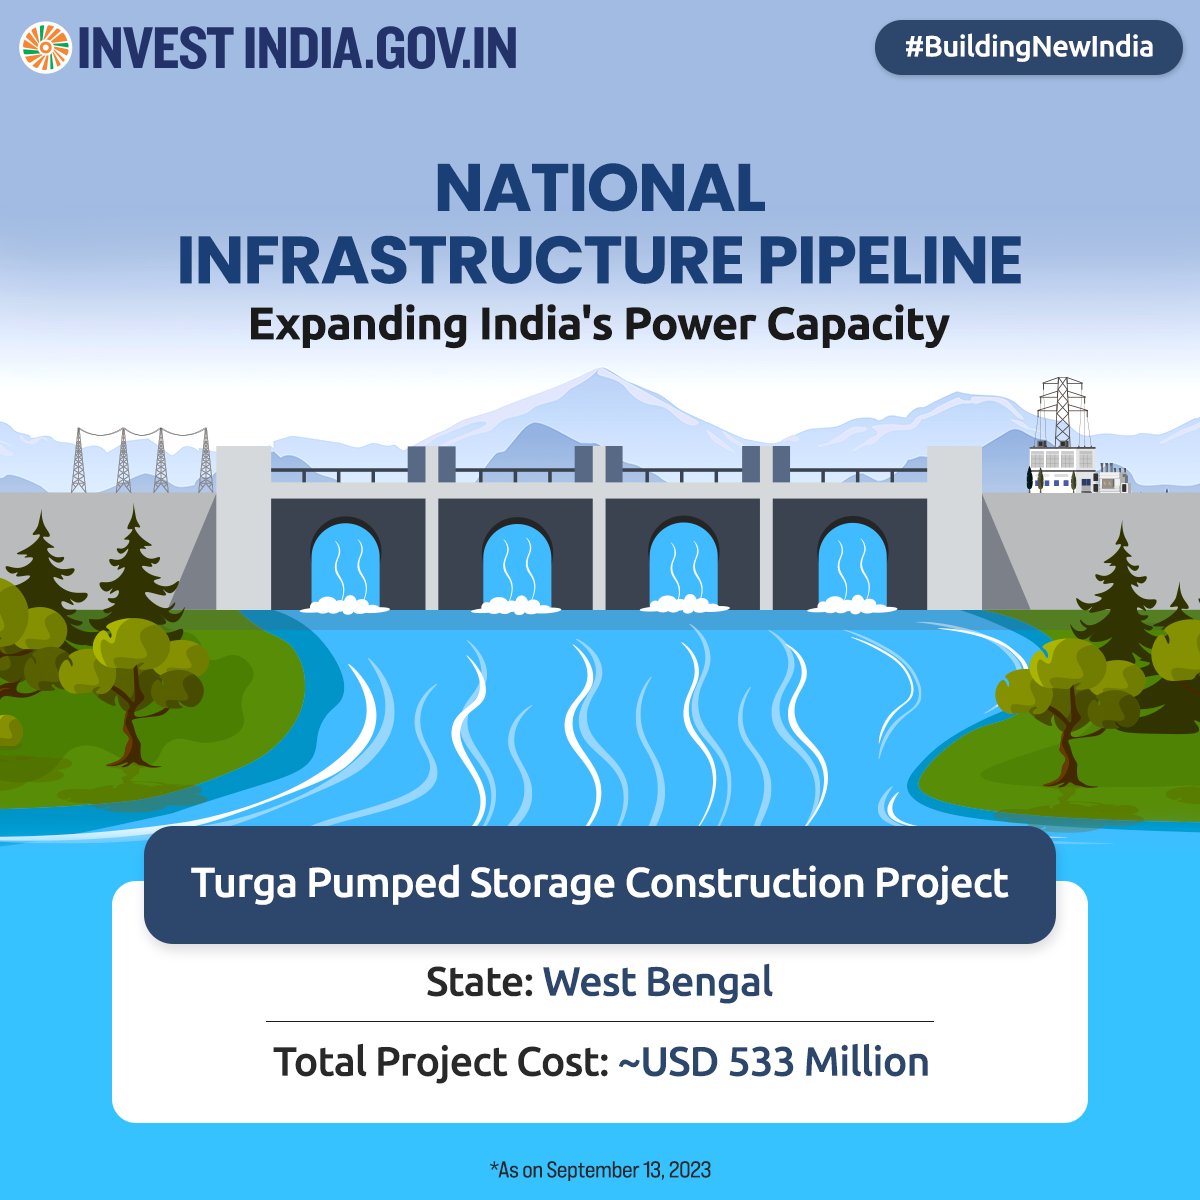 Under #NIP, the Turga Pumped Storage Project (4 X 250 MW) is designed to harness rainfall from the Turga Nala catchment area in the Ayodhya hills to meet #WestBengal's #cleanenergy demands.

Know more: bit.ly/page_NIP

#BuildingNewIndia #NationalInfrastructurePipeline